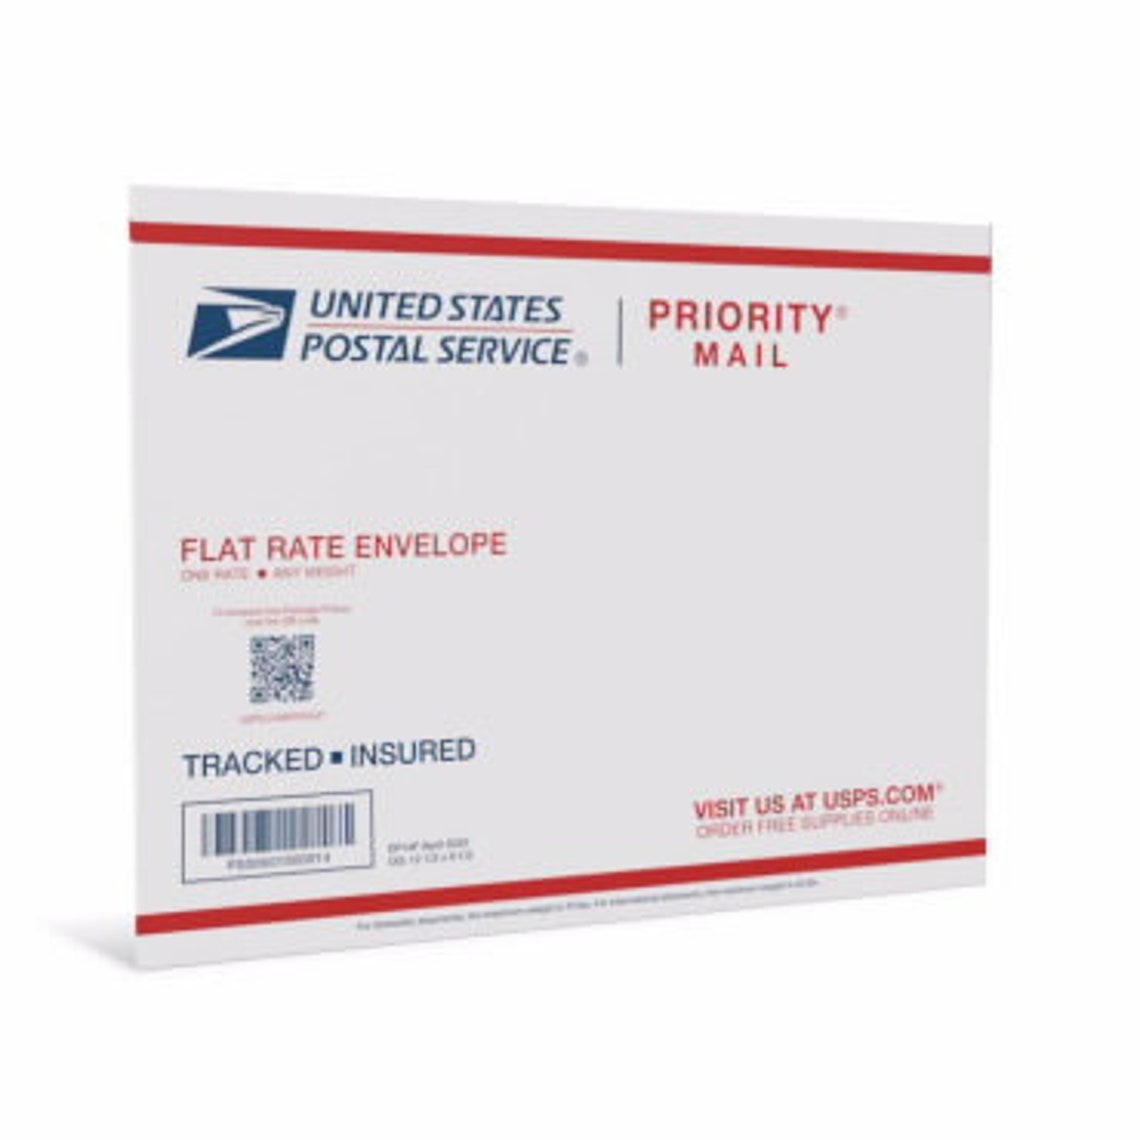 shipping-upgrade-to-usps-priority-mail-flat-rate-envelope-etsy